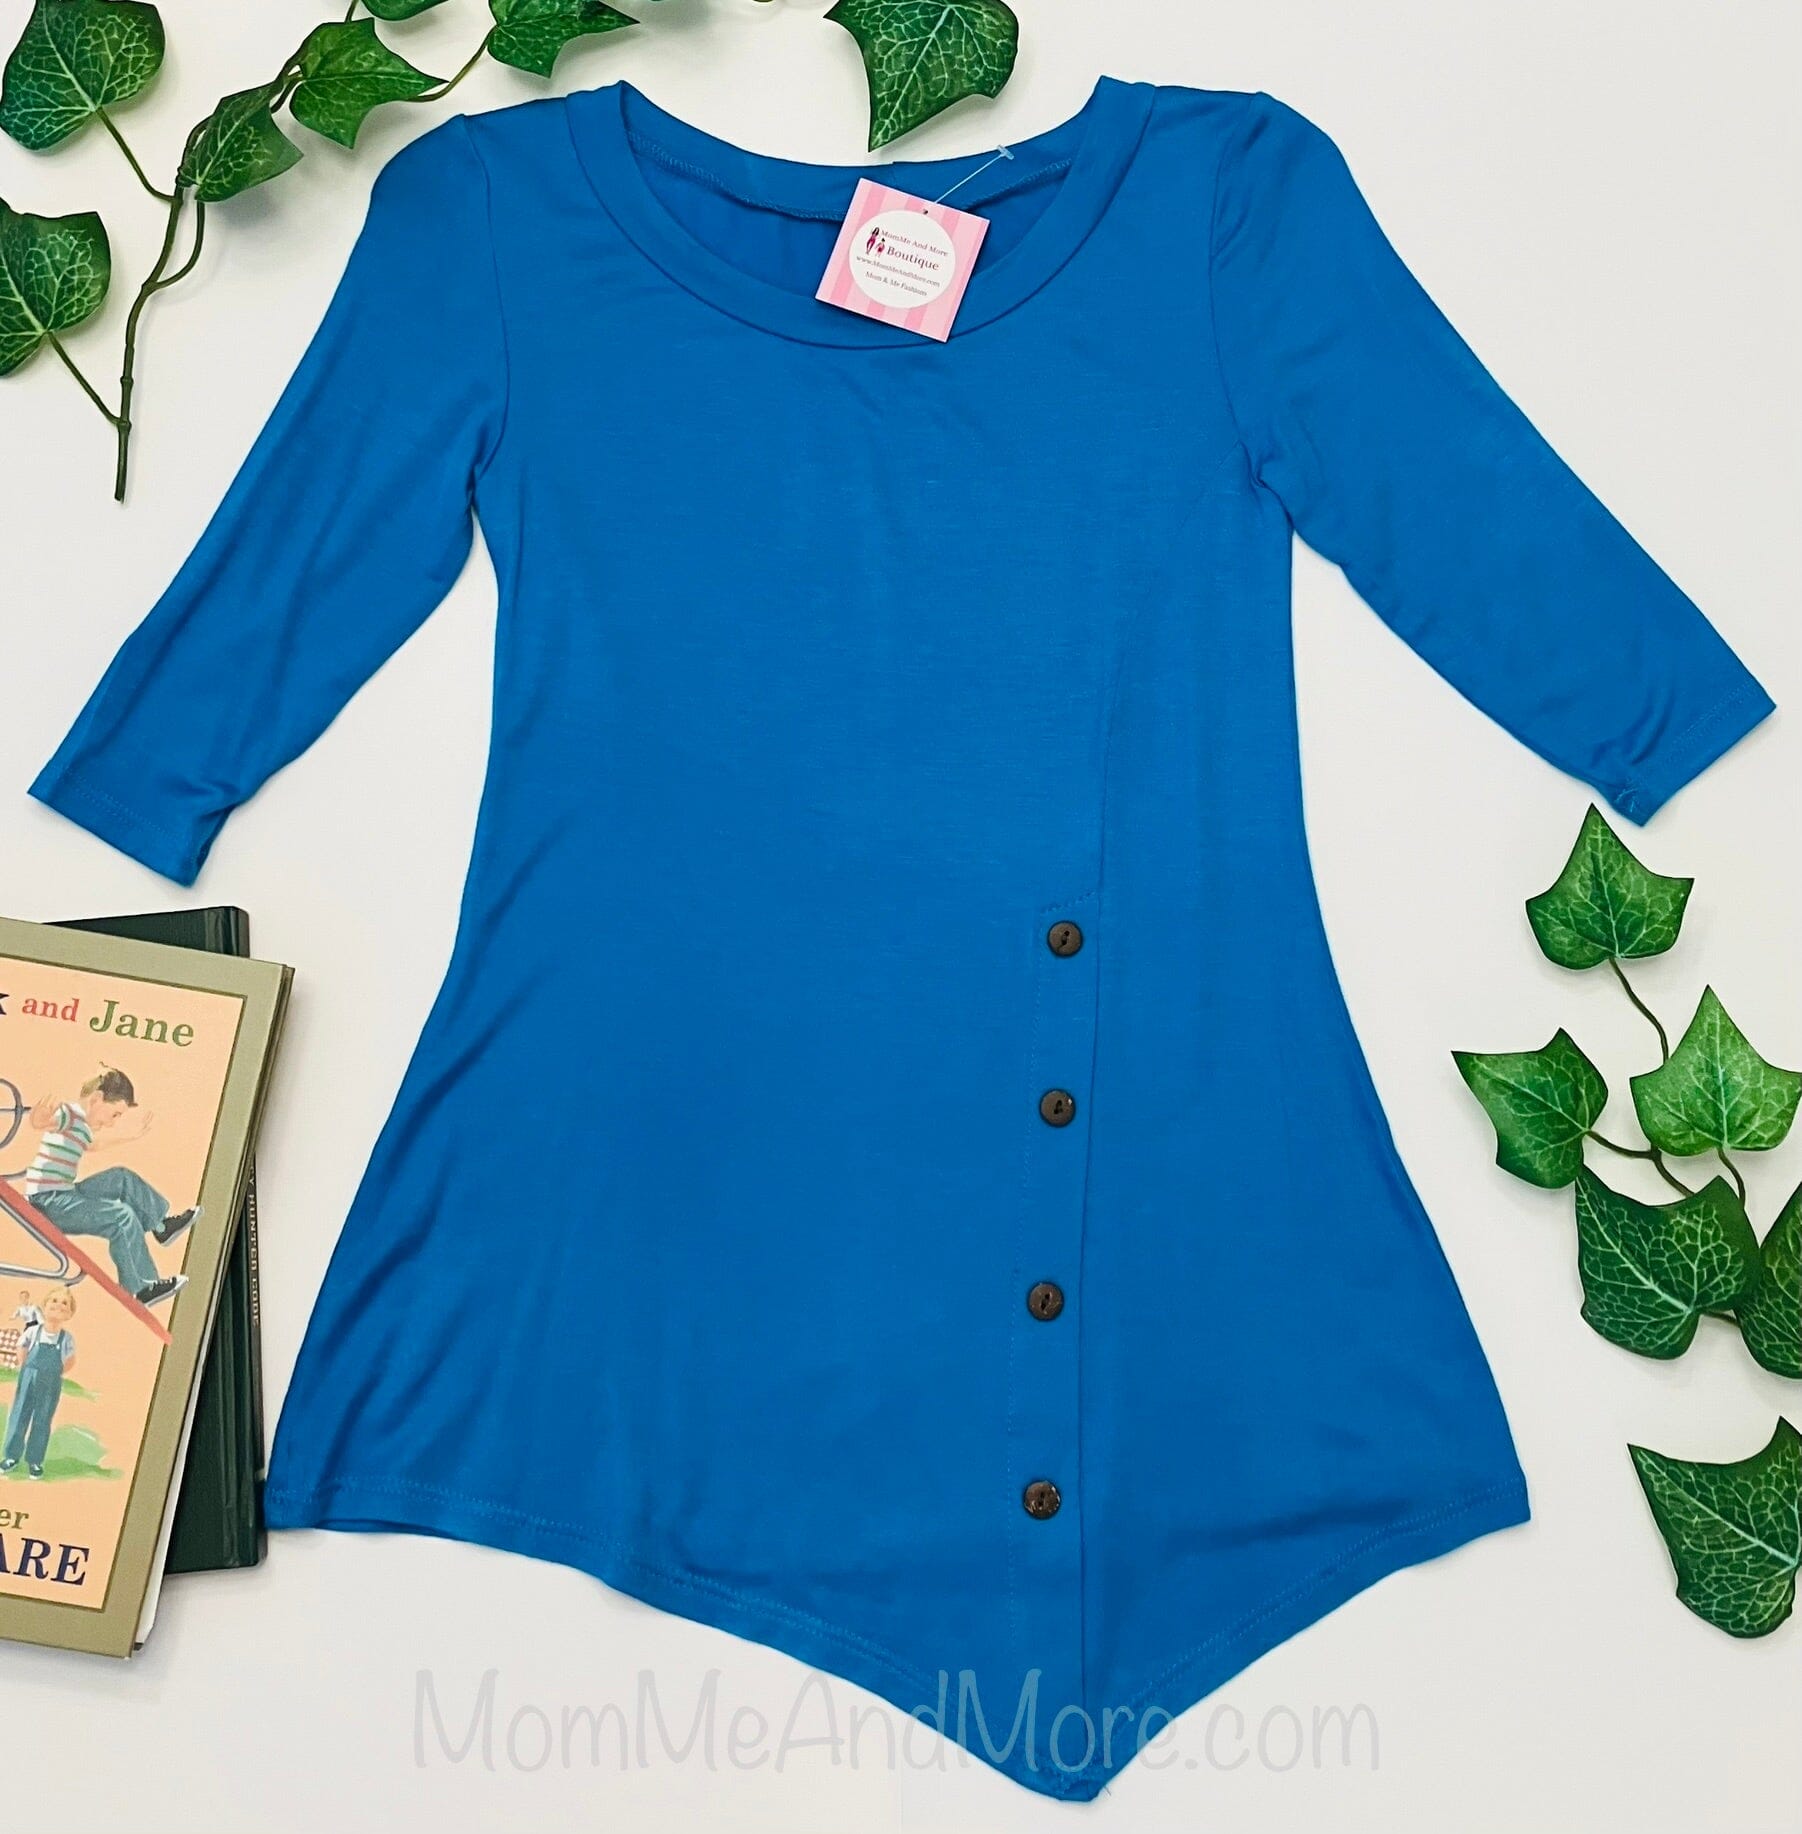 Girls Teal Blue Dress | High-Low Dress | Long Tunic Top dress MomMe and More 